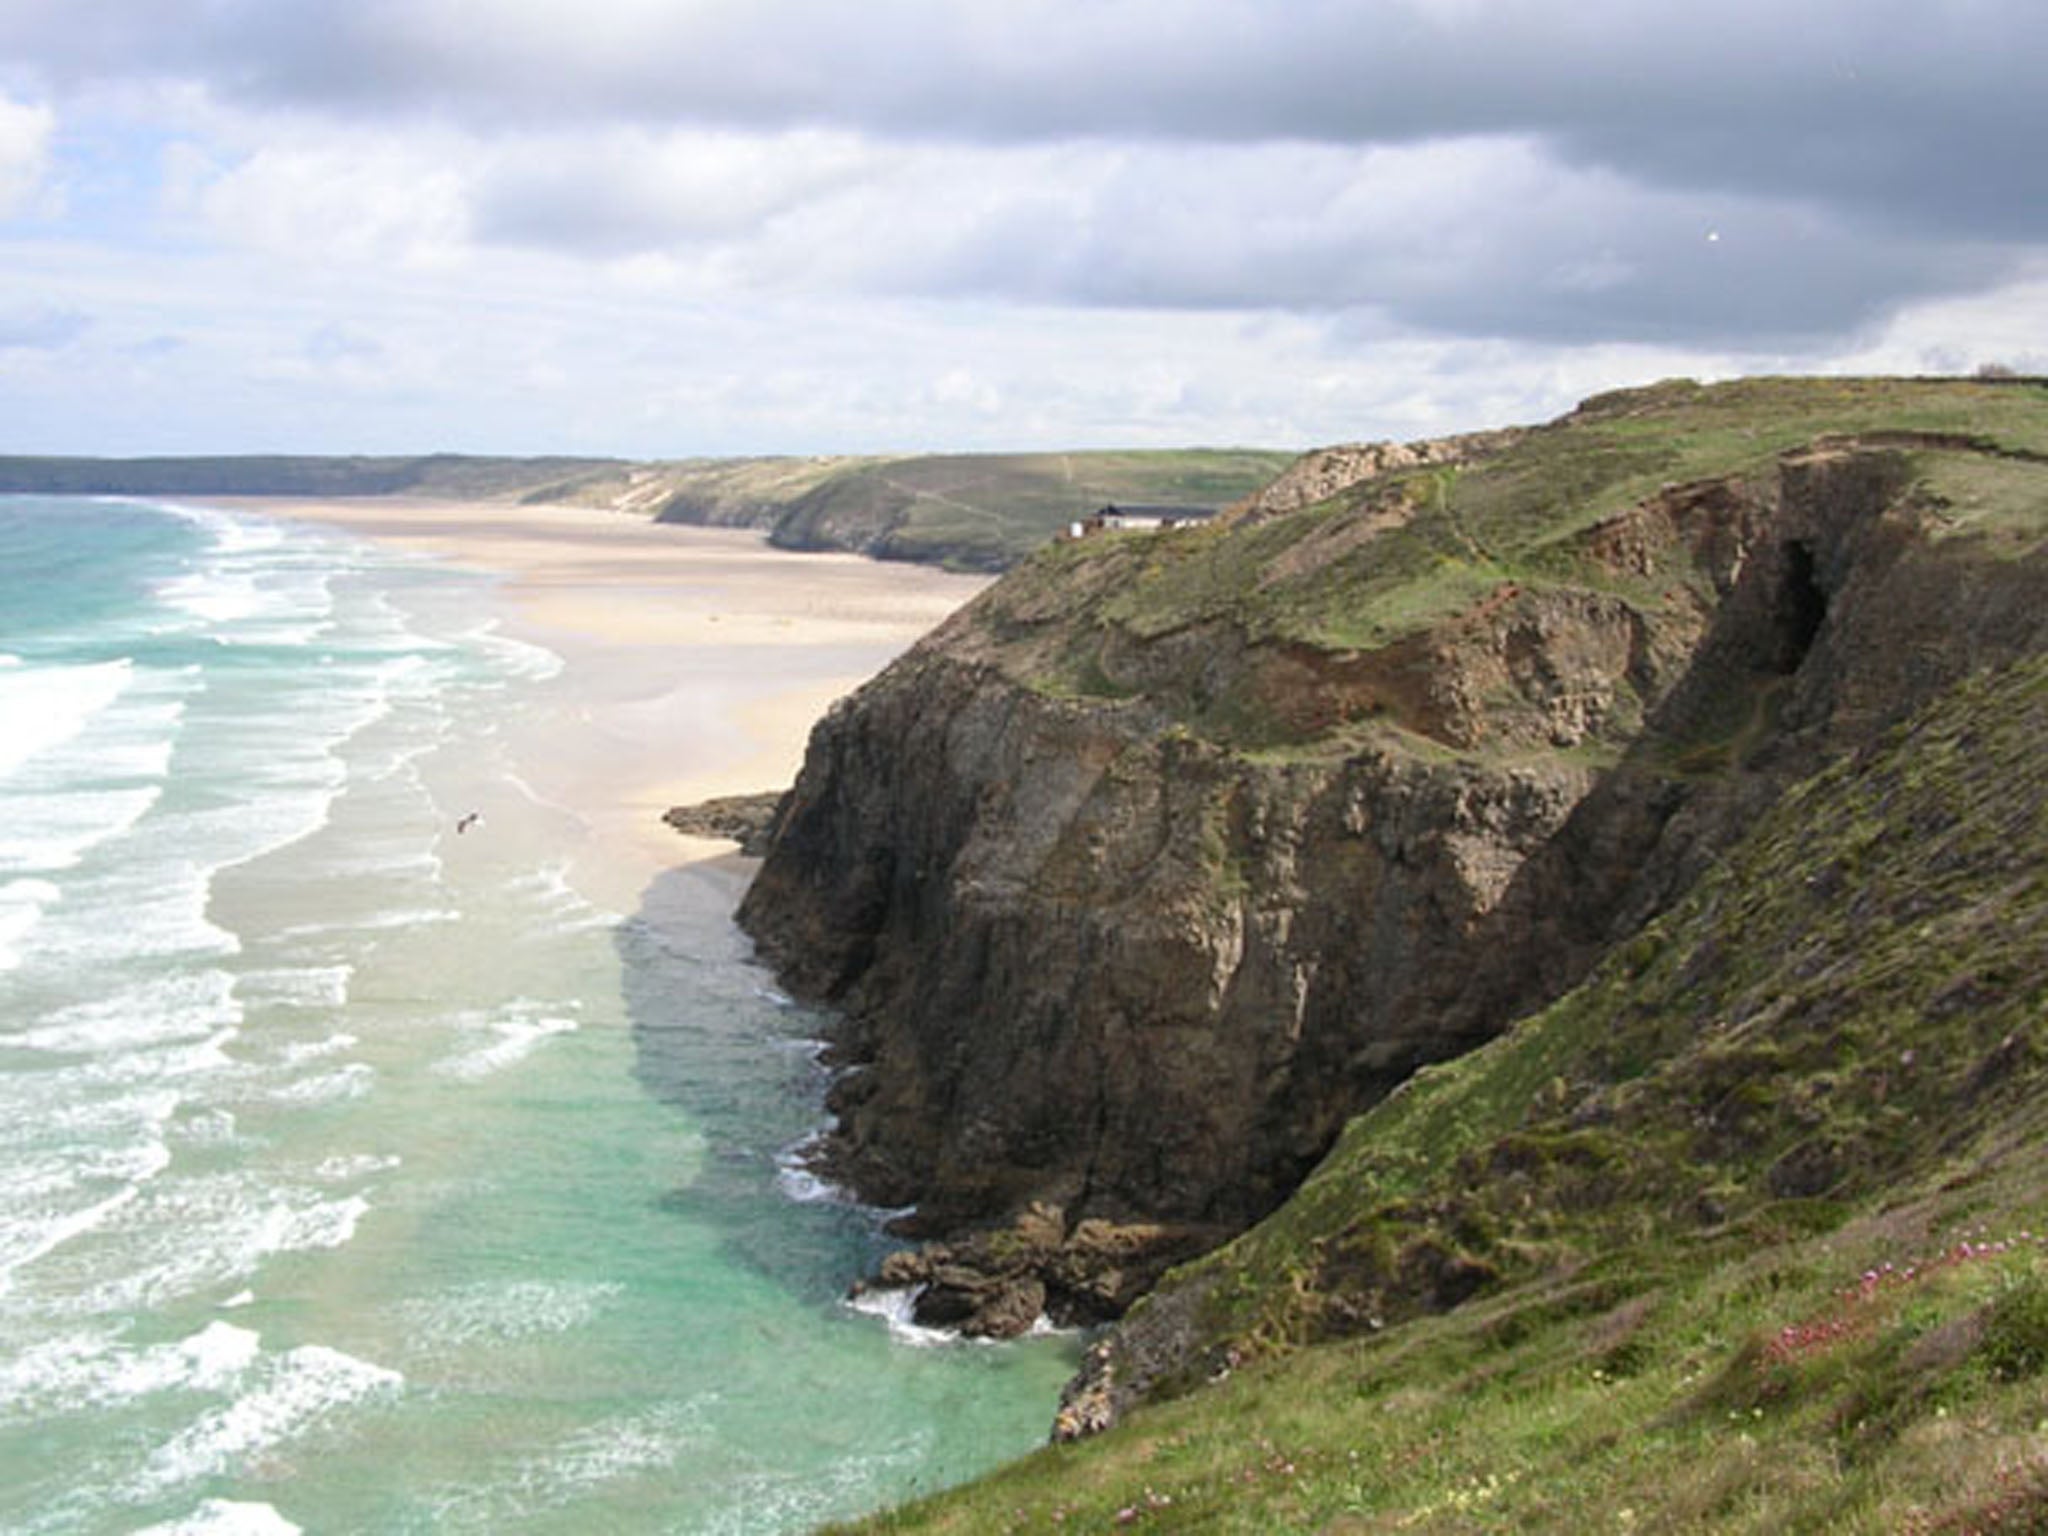 The man's body was found washed up naked on Perranporth beach in Cornwall